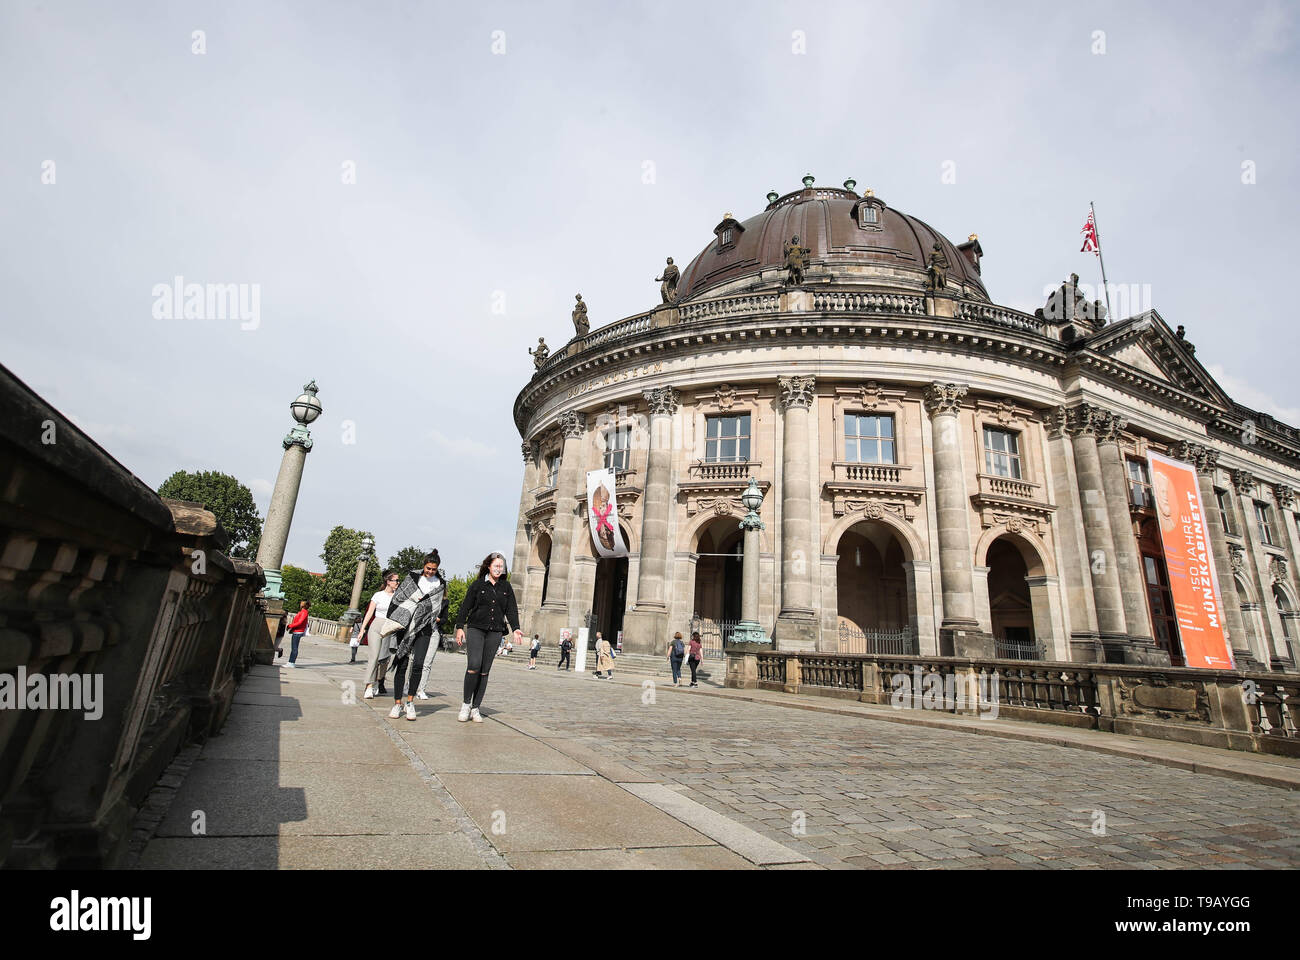 Beijing, Germany. 17th May, 2019. Pedestrians walk past the Bode Museum at Museum Island in Berlin, capital of Germany, on May 17, 2019. Museum Island, a UNESCO world heritage site, is the northern part of an island in the Spree river in Berlin. Its name comes from the complex of worldwide famous museums such as Altes Museum (Old Museum), Neues Museum (New Museum), Alte Nationalgalerie (Old National Gallery), Bode Museum and Pergamon Museum. May 18 marks the International Museum Day. Credit: Shan Yuqi/Xinhua/Alamy Live News Stock Photo